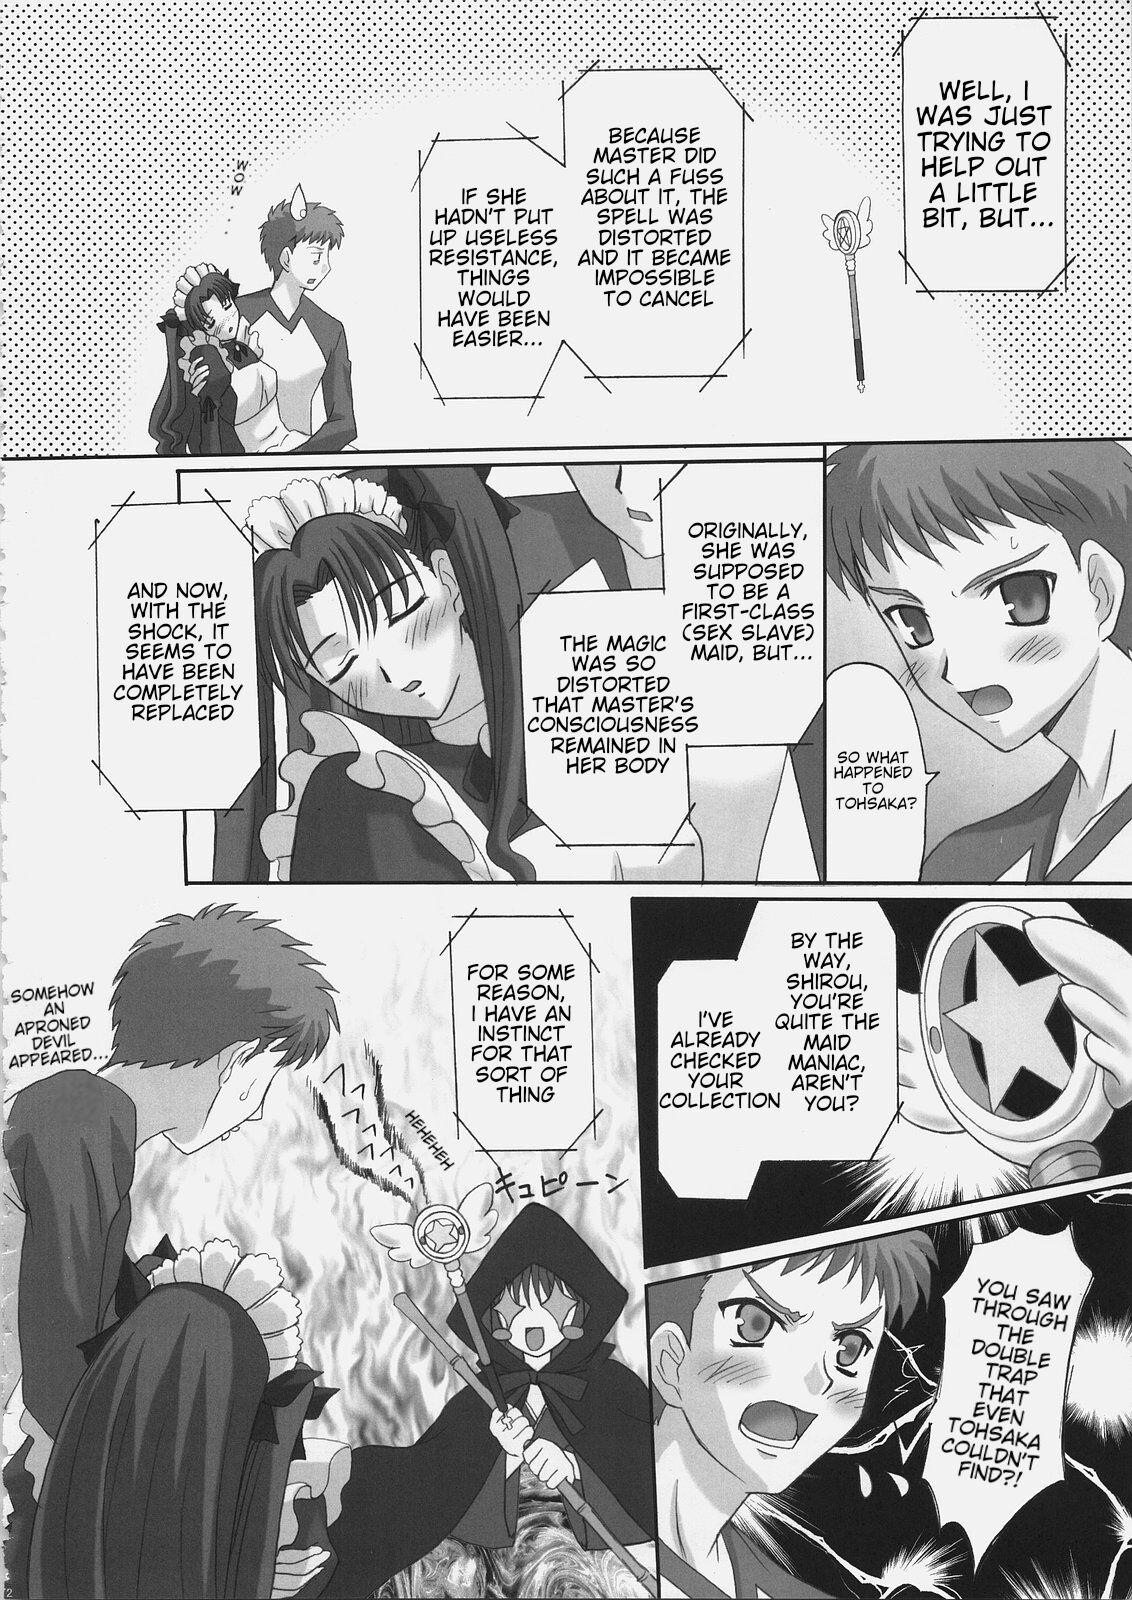 Puto EX PERIENCE - Fate stay night Riding Cock - Page 11